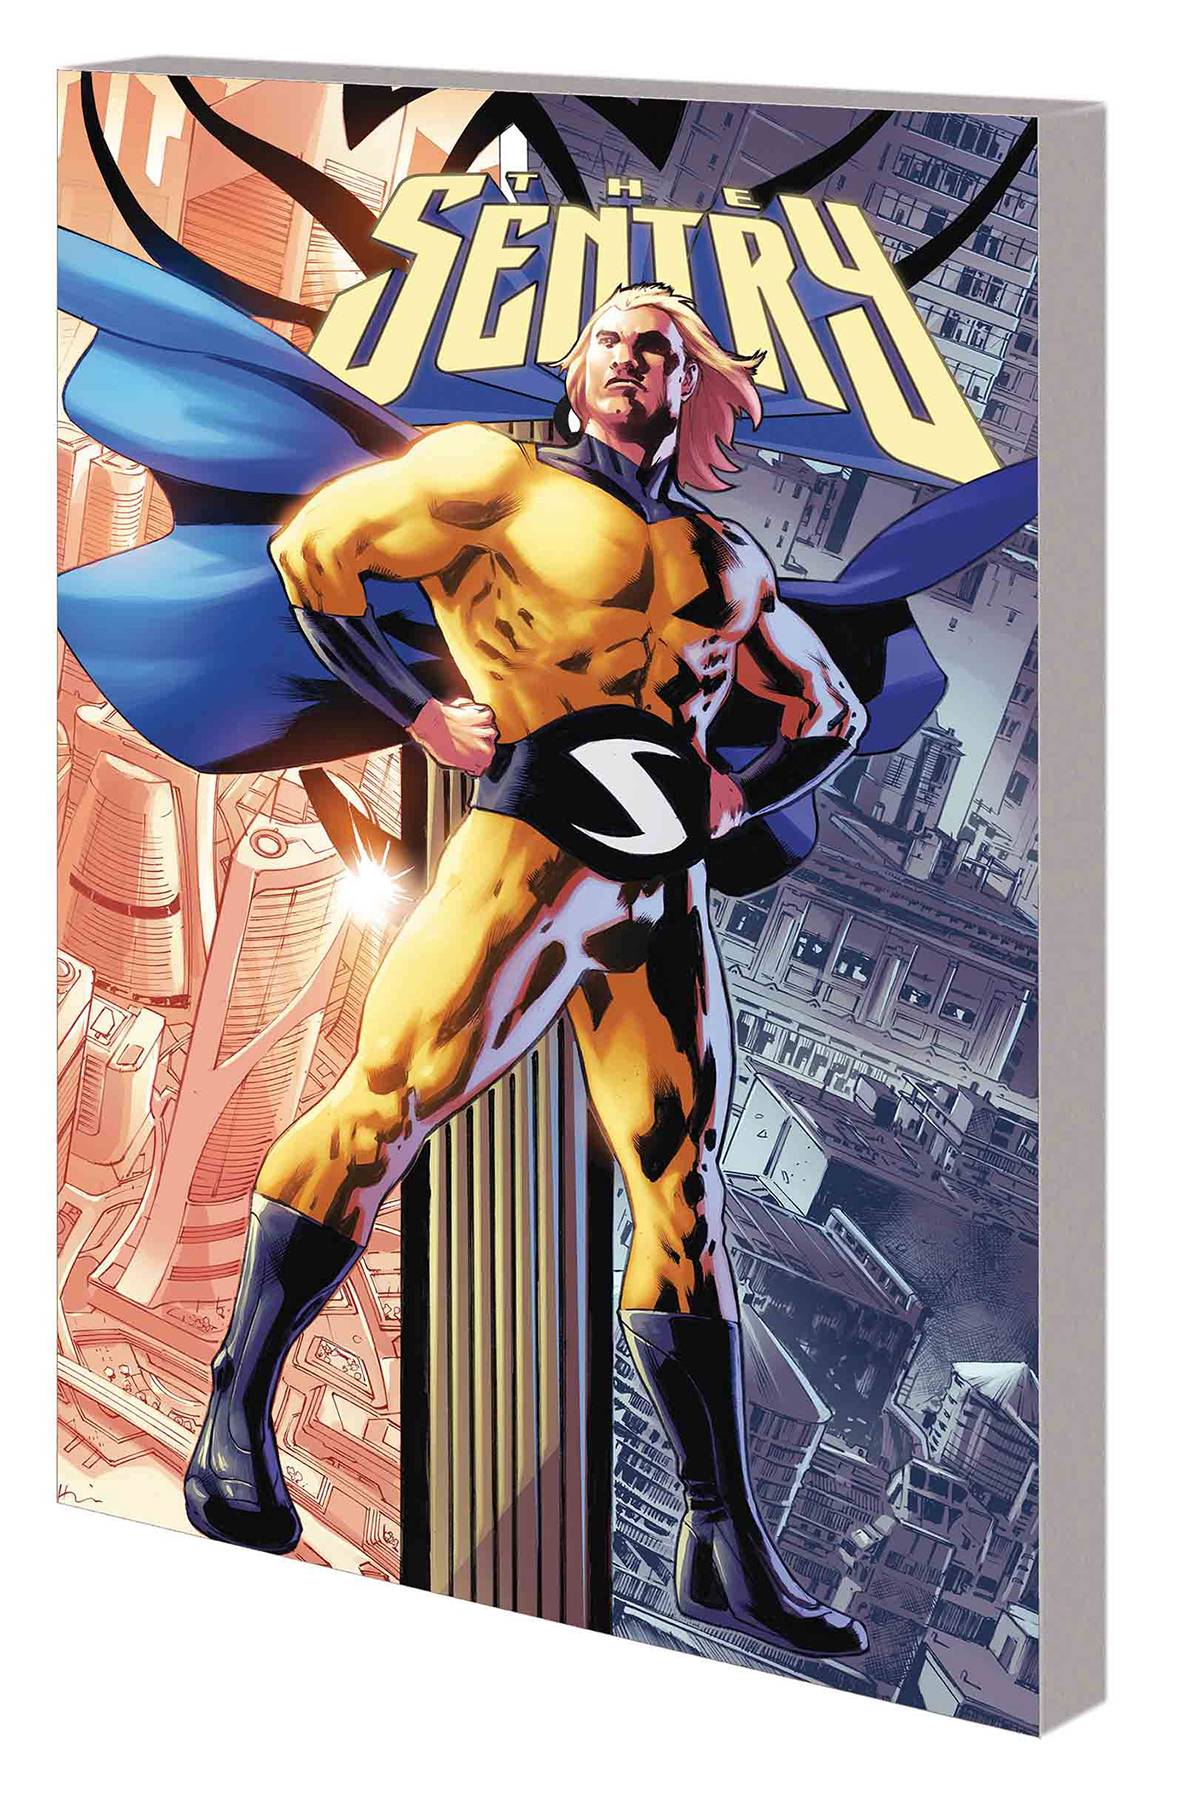 Sentry TP Vol 01 Man of Two Worlds - State of Comics